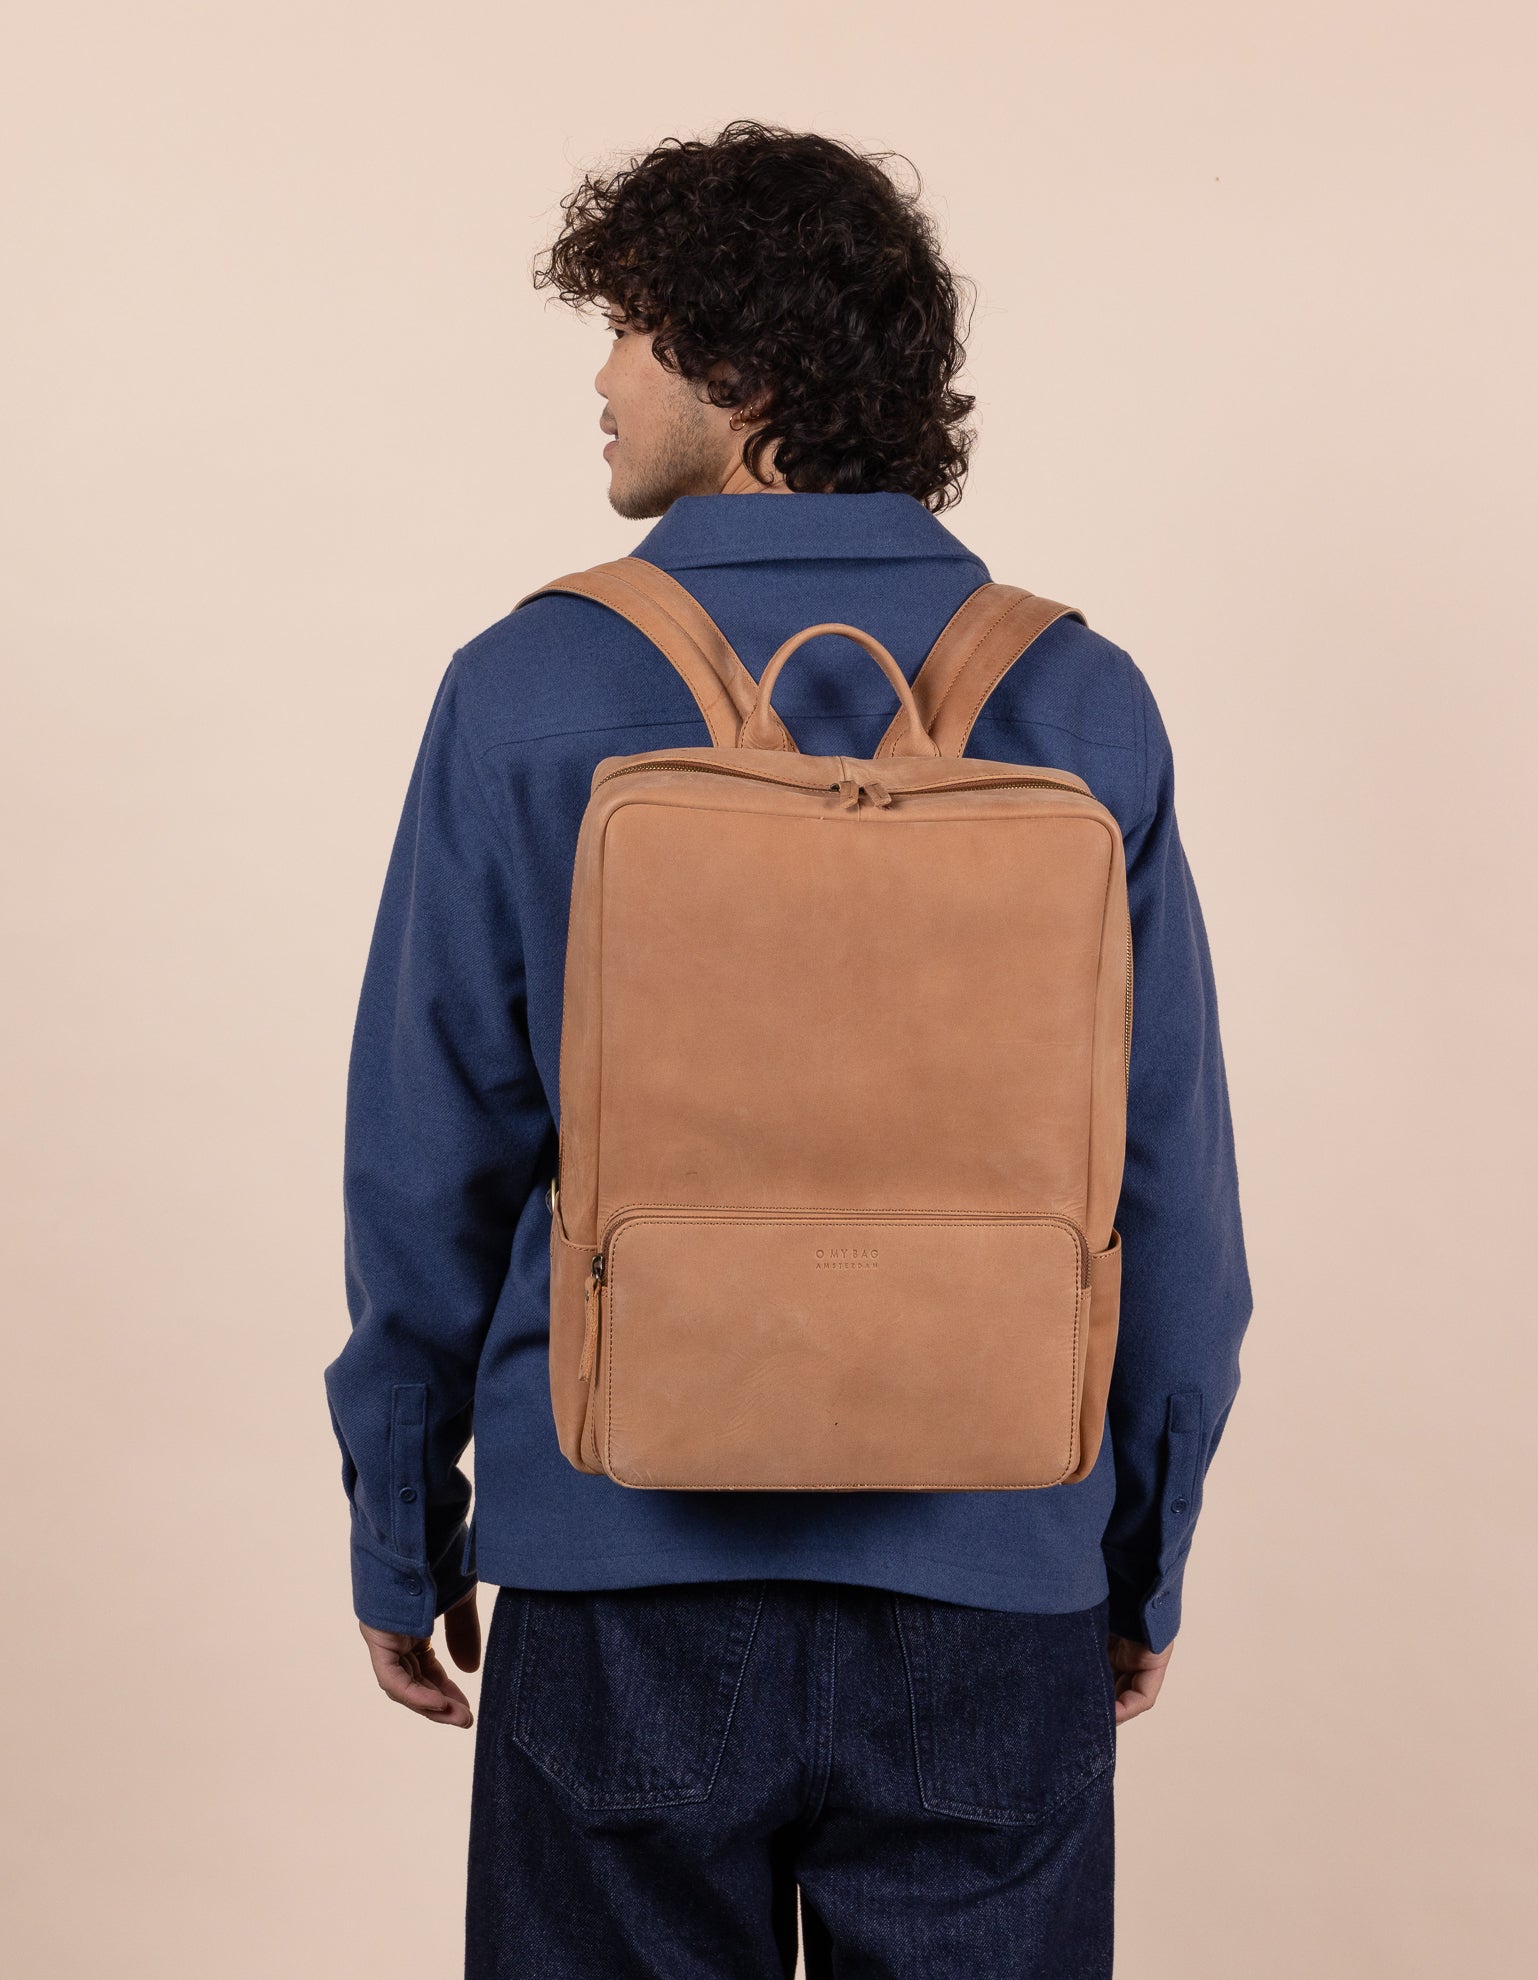 Camel Leather backpack. Model product image.